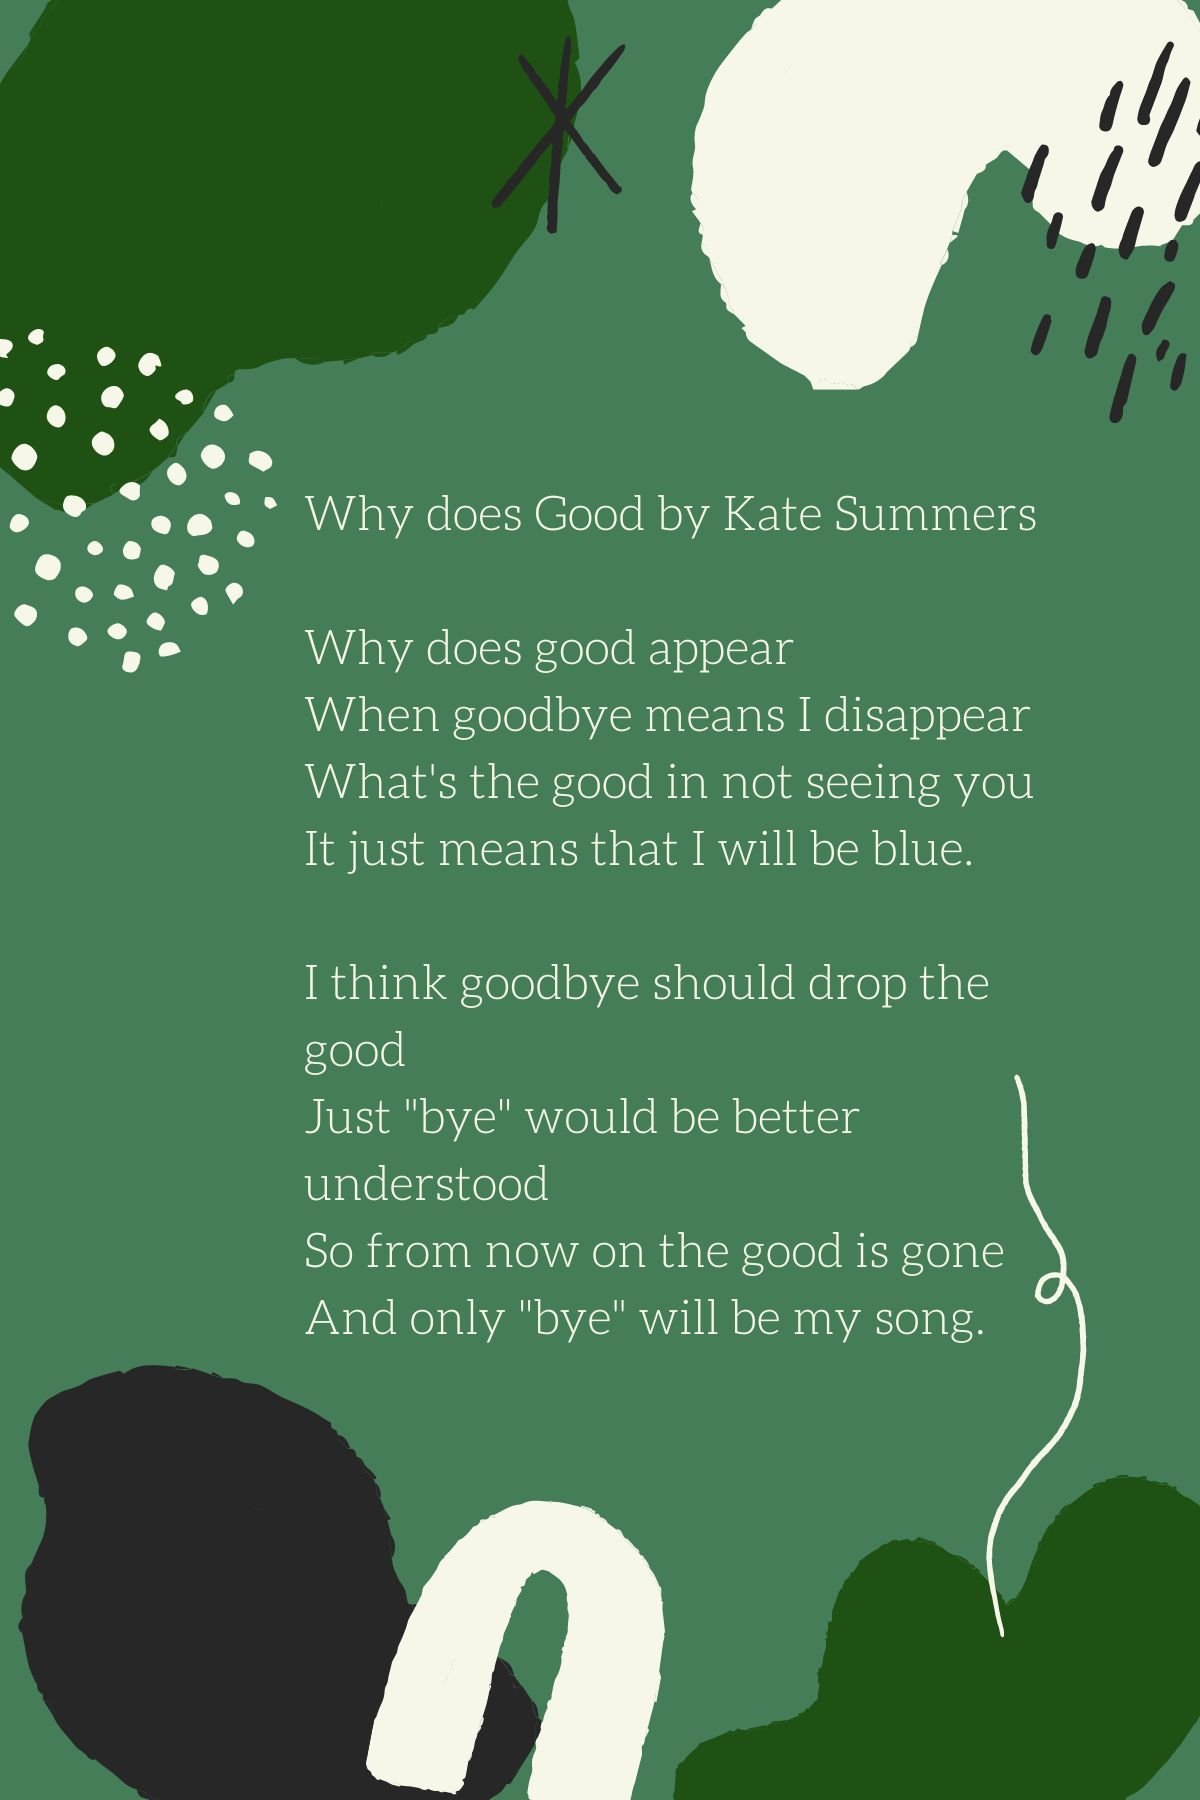 What does goodbye mean?